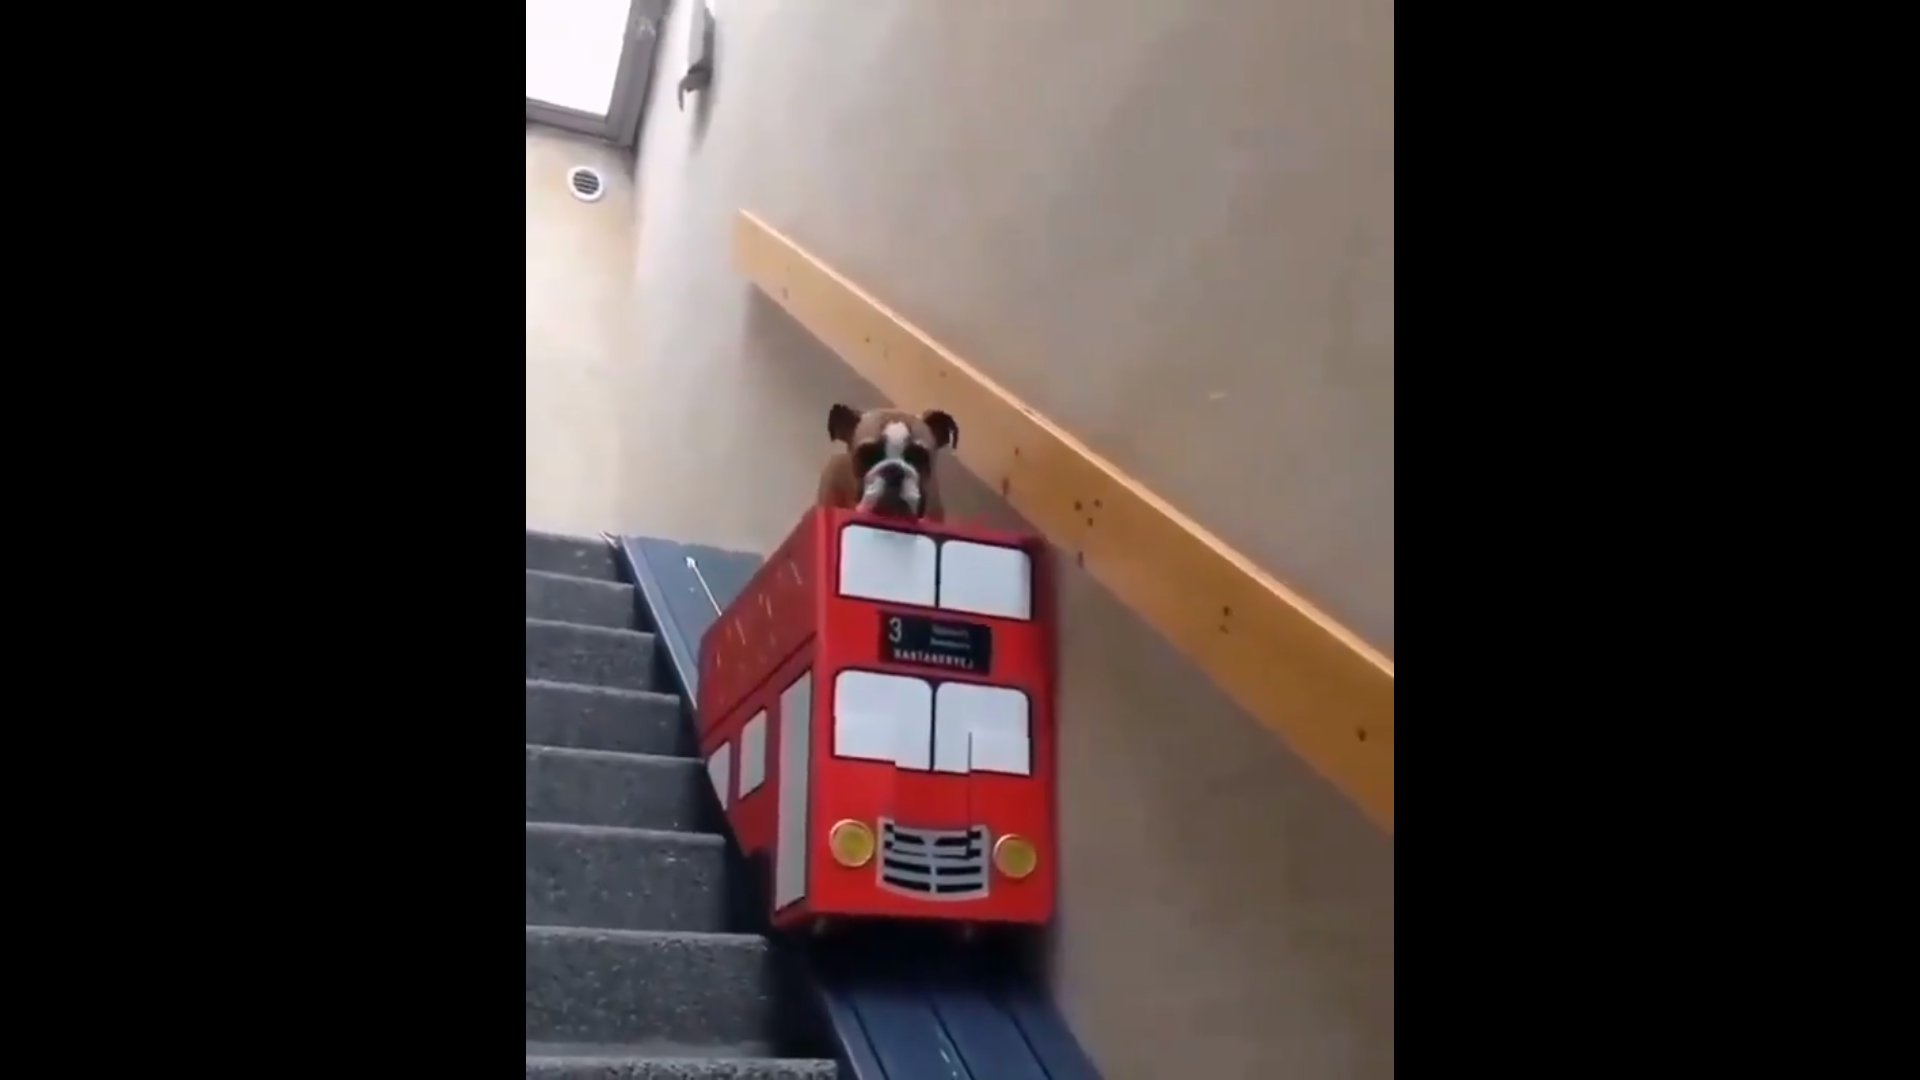 Honk, Honk! Make Way For This Pupper Arriving In A Lift